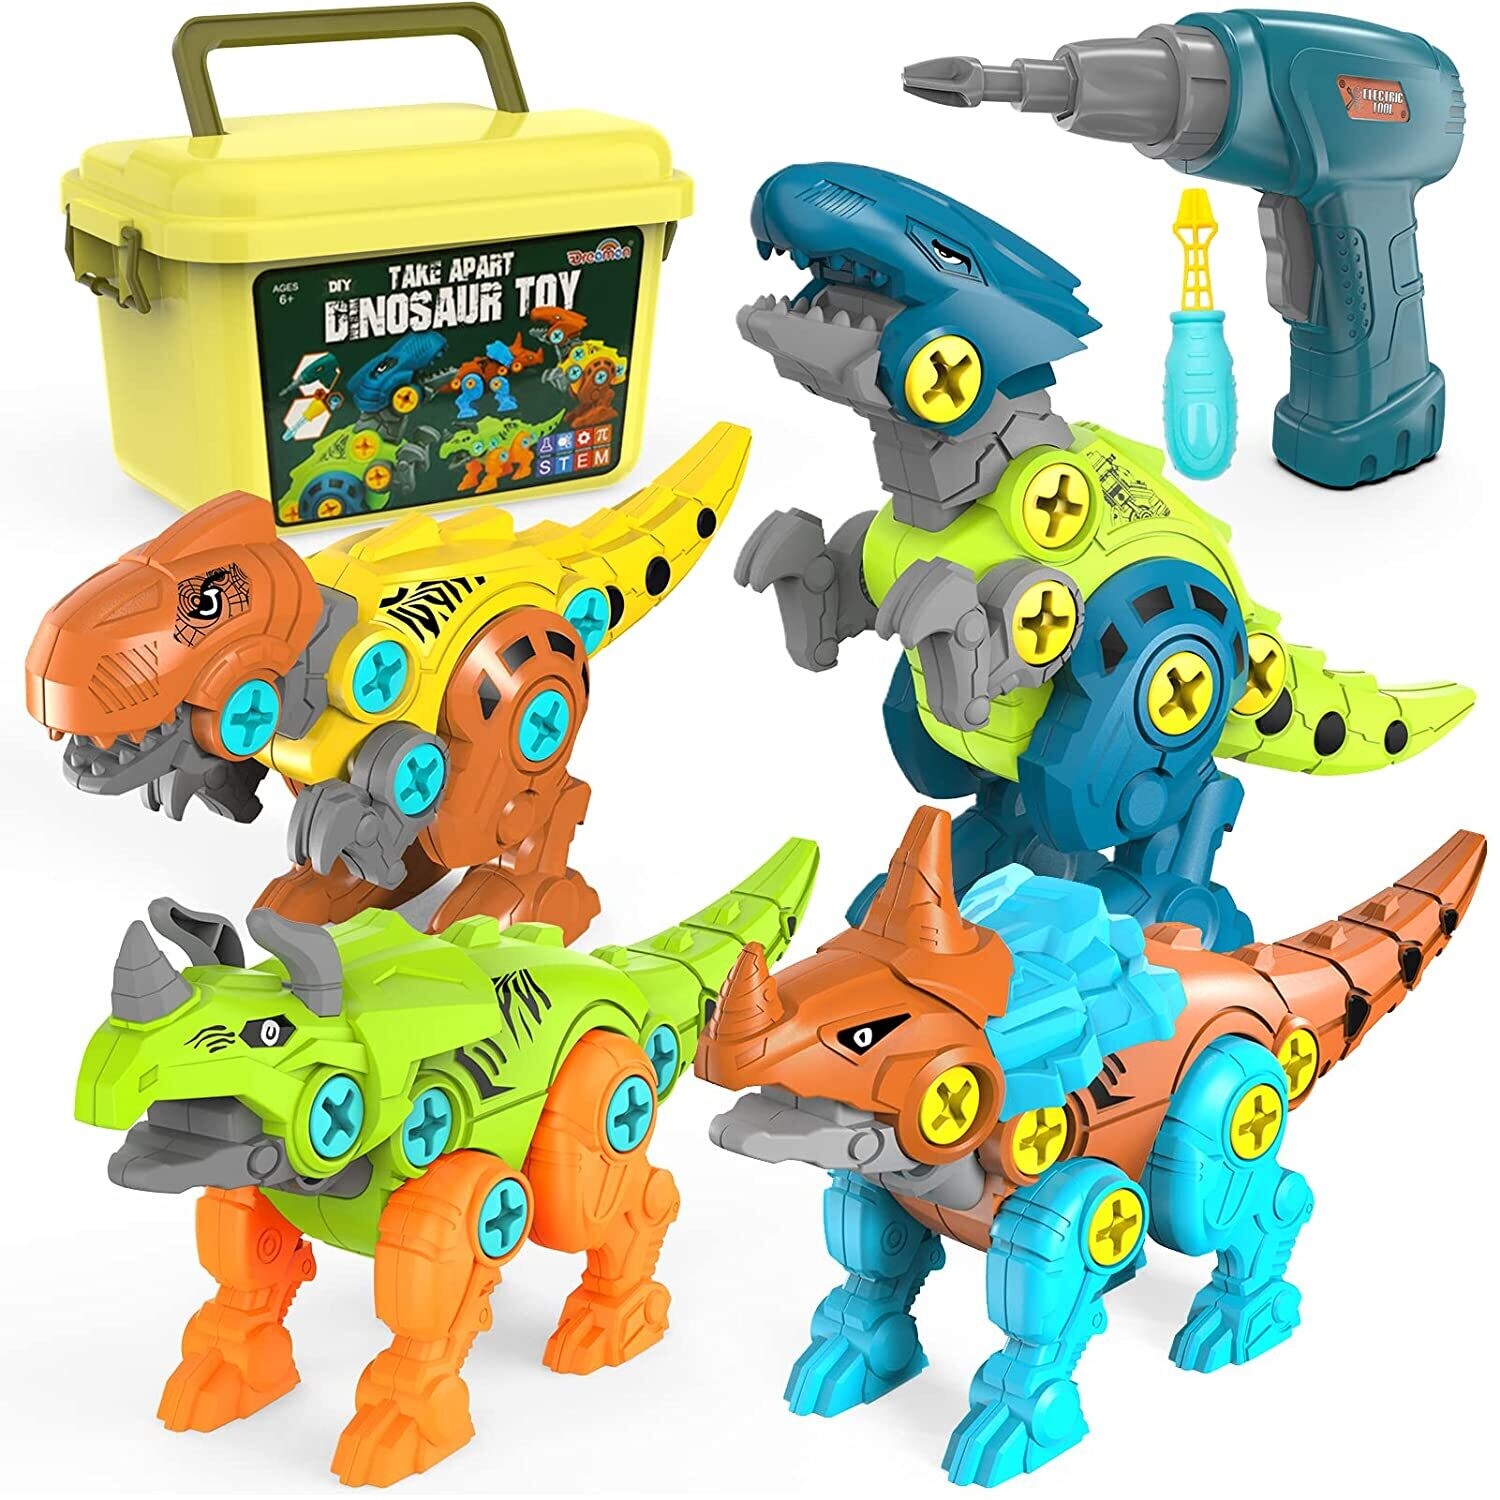 Take Apart Dinosaur Toys for Kids with Storage Box Electric Drill